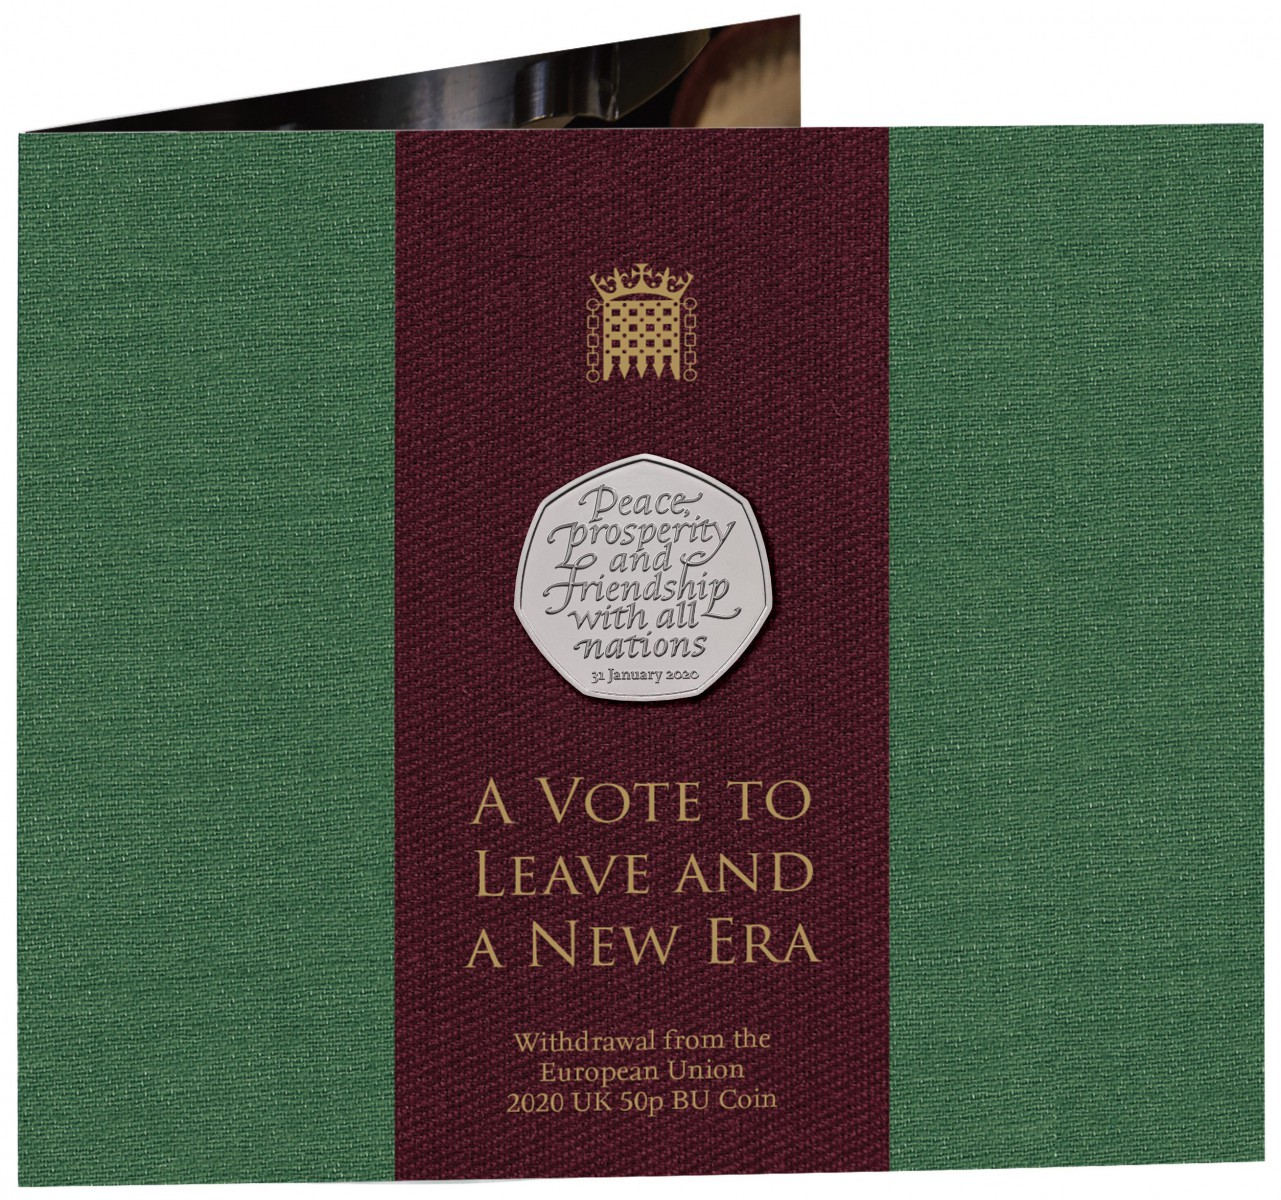 The brilliant uncirculated edition of the coin comes in a commemorative wallet and normally costs 10